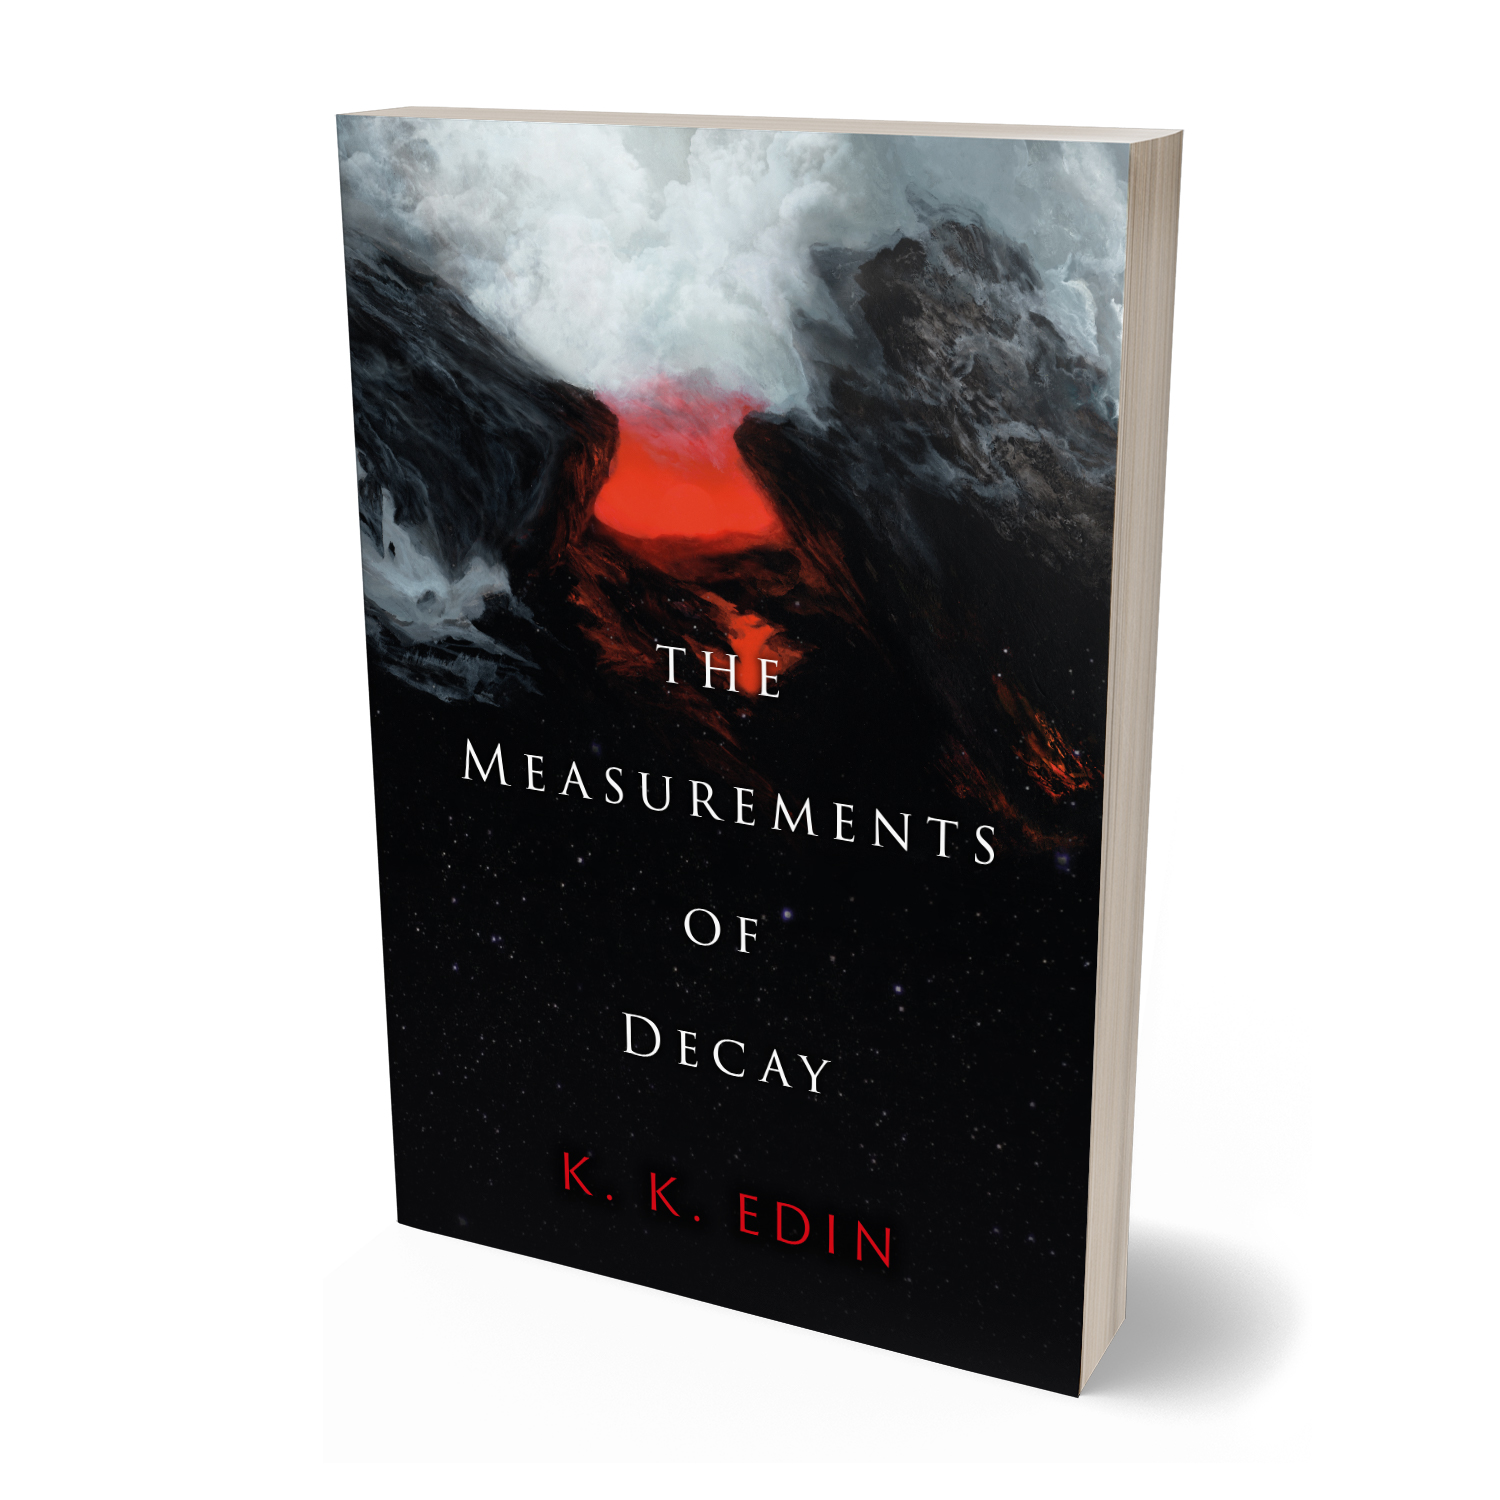 'The Measurements of Decay' is a bespoke cover design for a modern classic scifi novel. The book cover was designed by Mark Thomas, of coverness.com. To find out more about my book design services, please visit www.coverness.com.